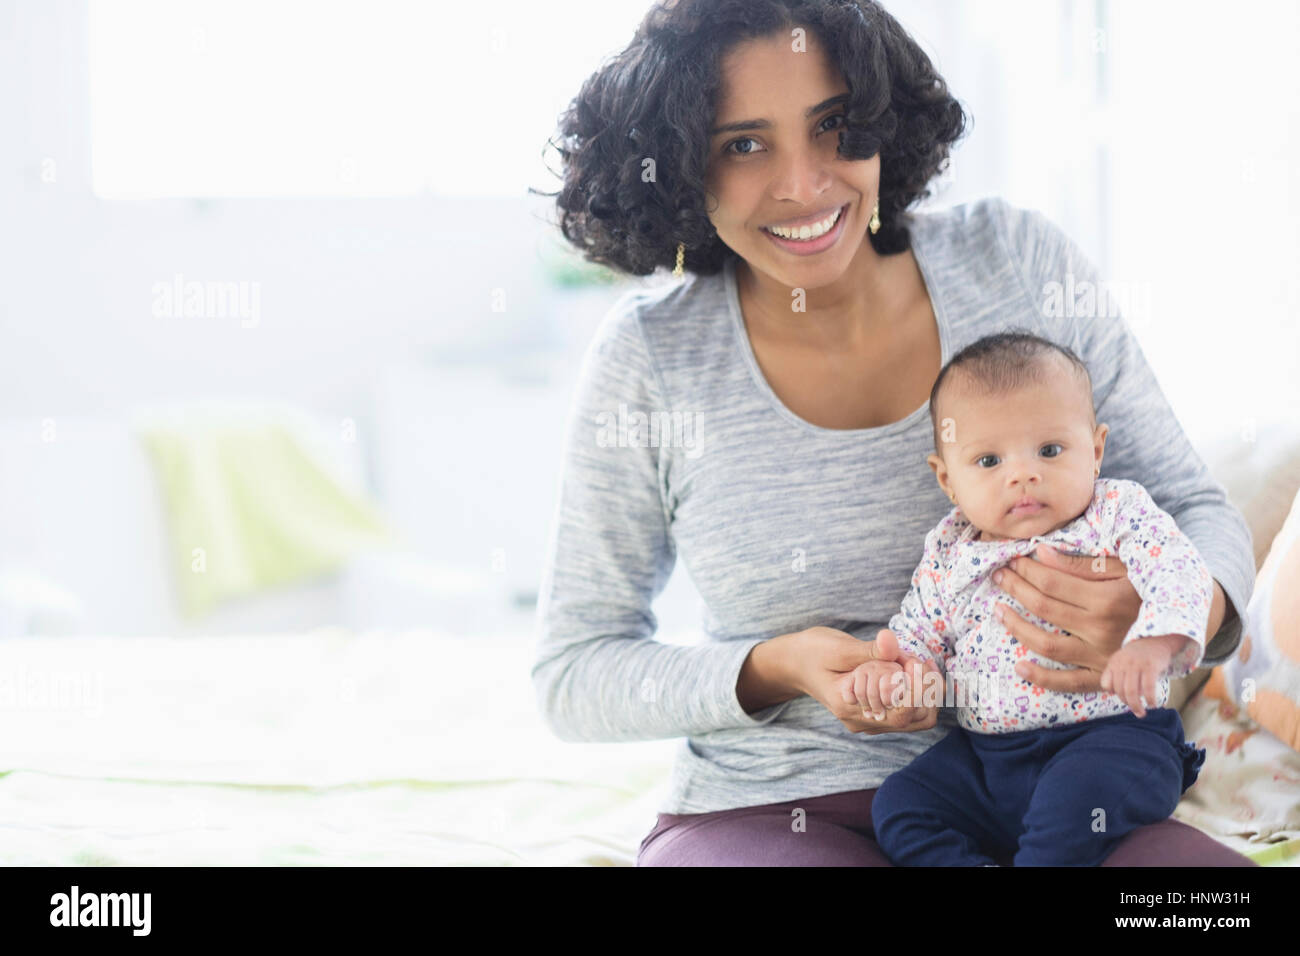 Hispanic mother posing with baby daughter Stock Photo